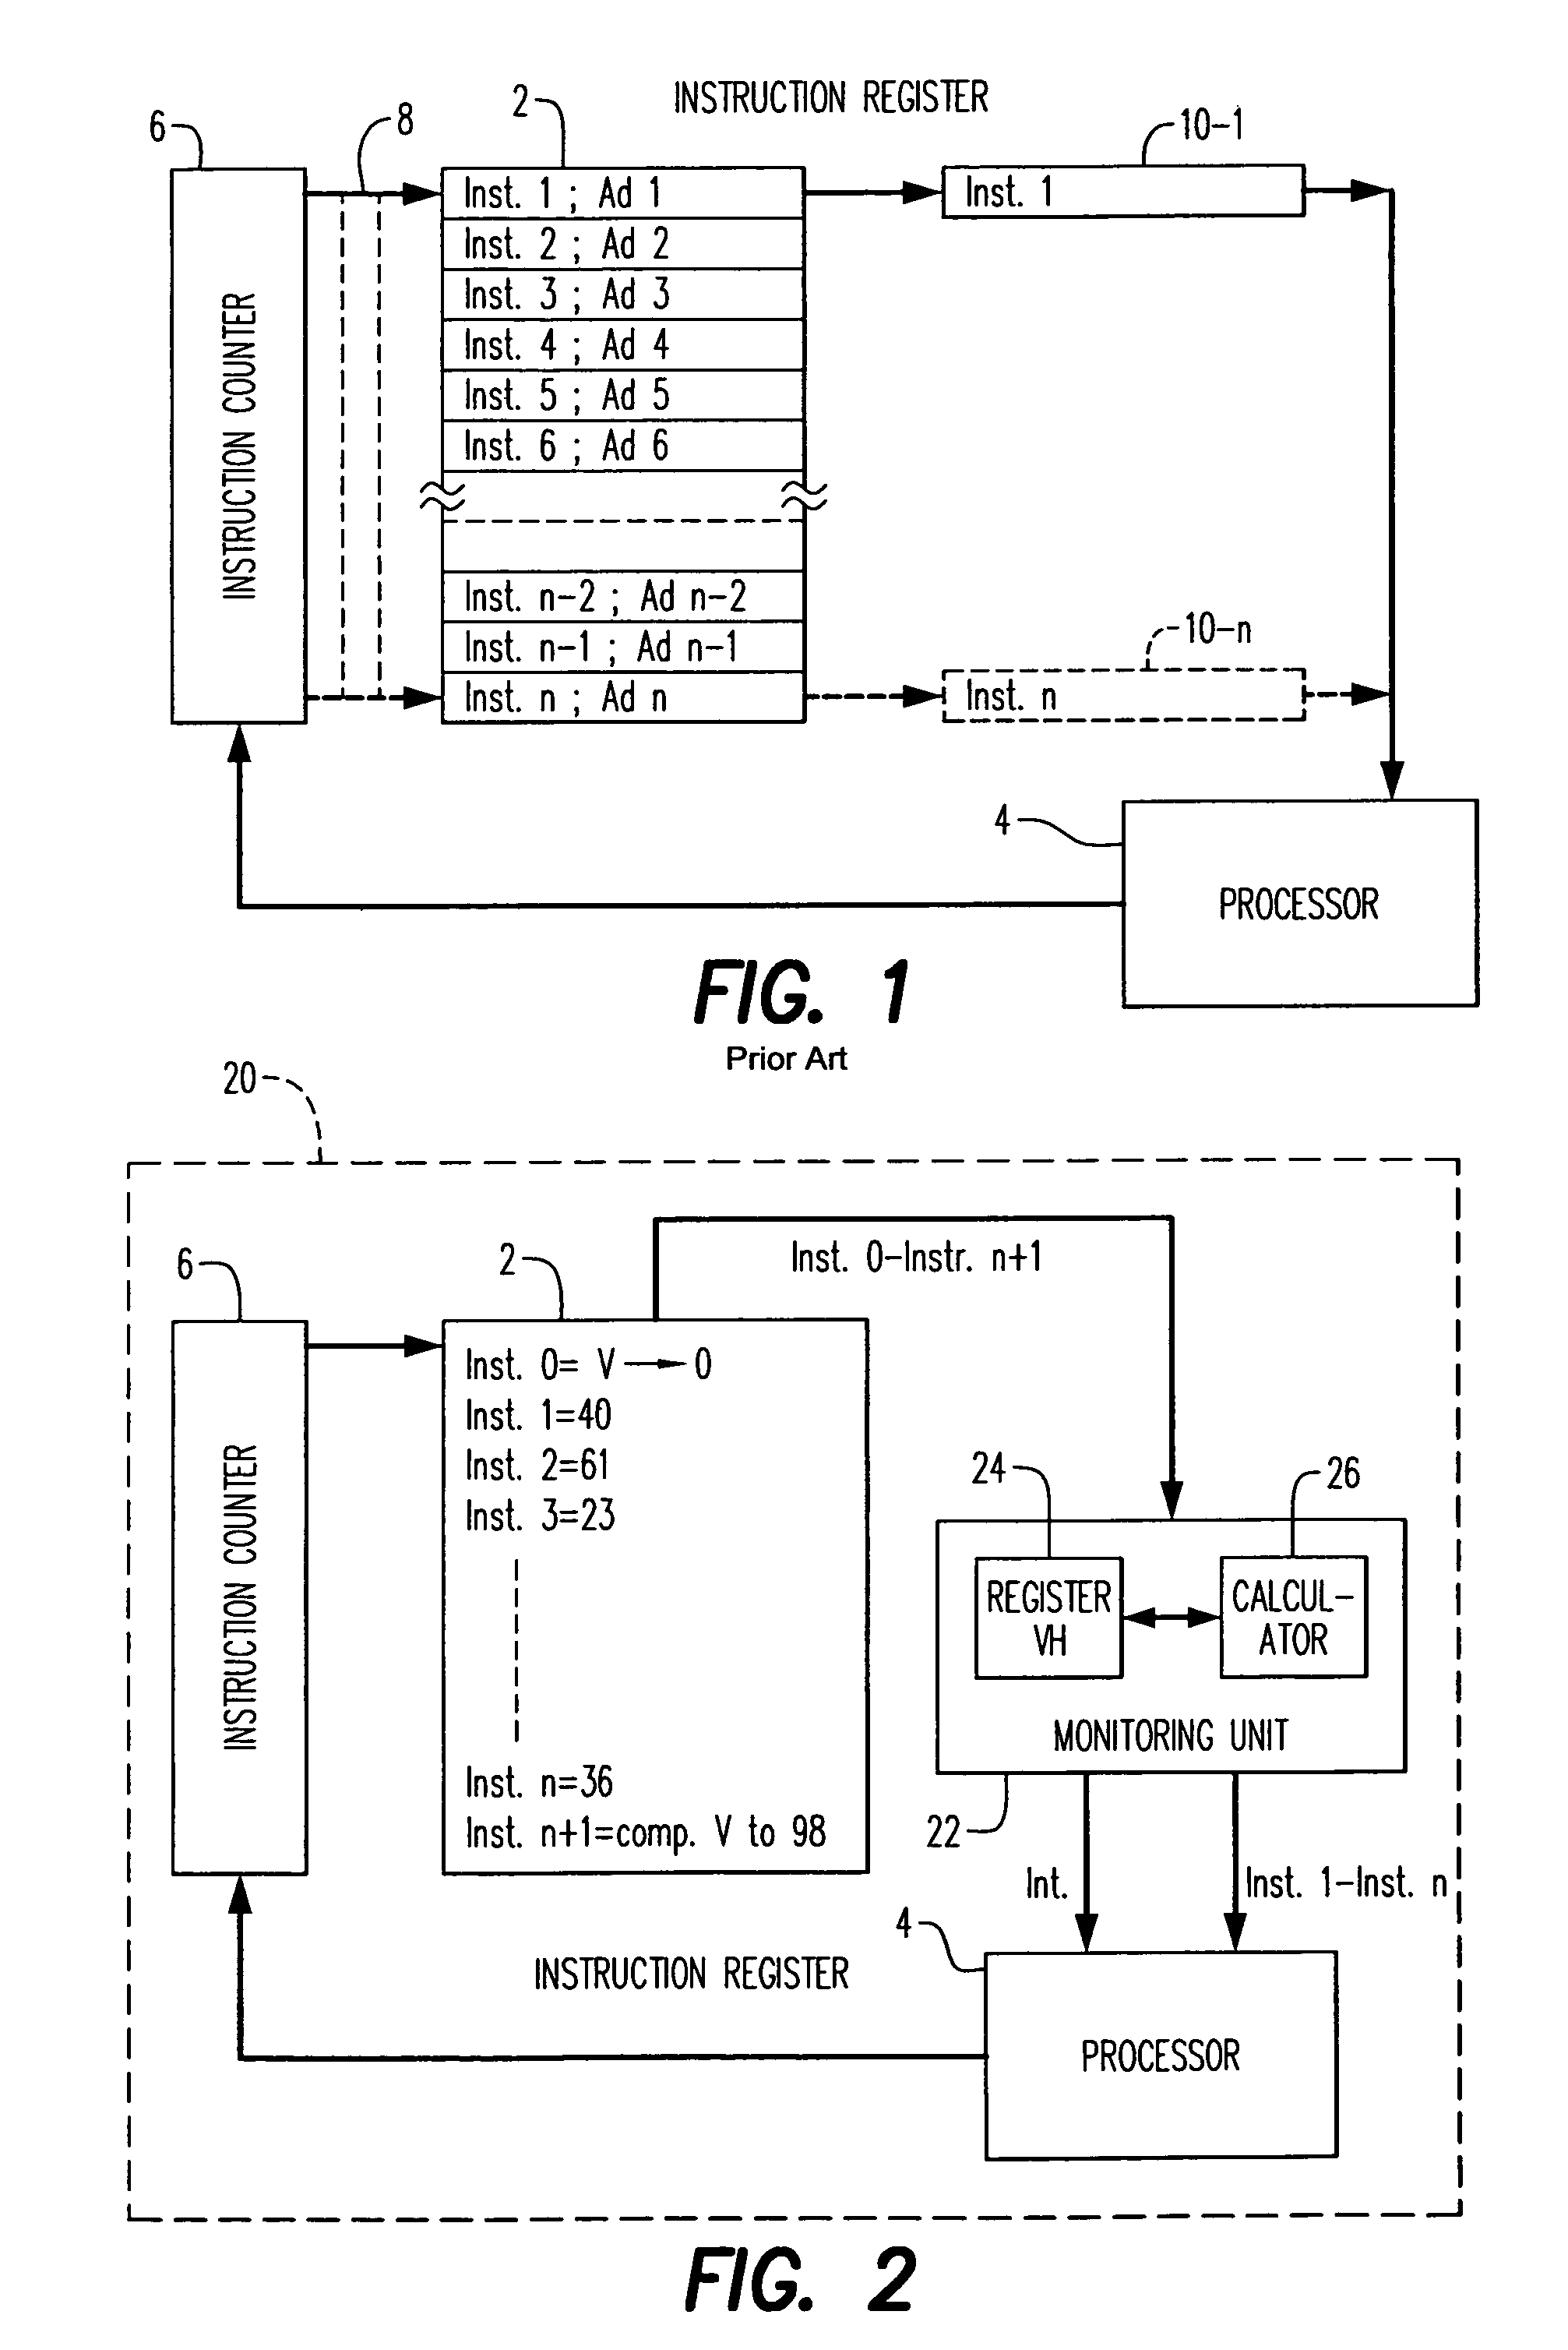 Method for monitoring program flow to verify execution of proper instructions by a processor